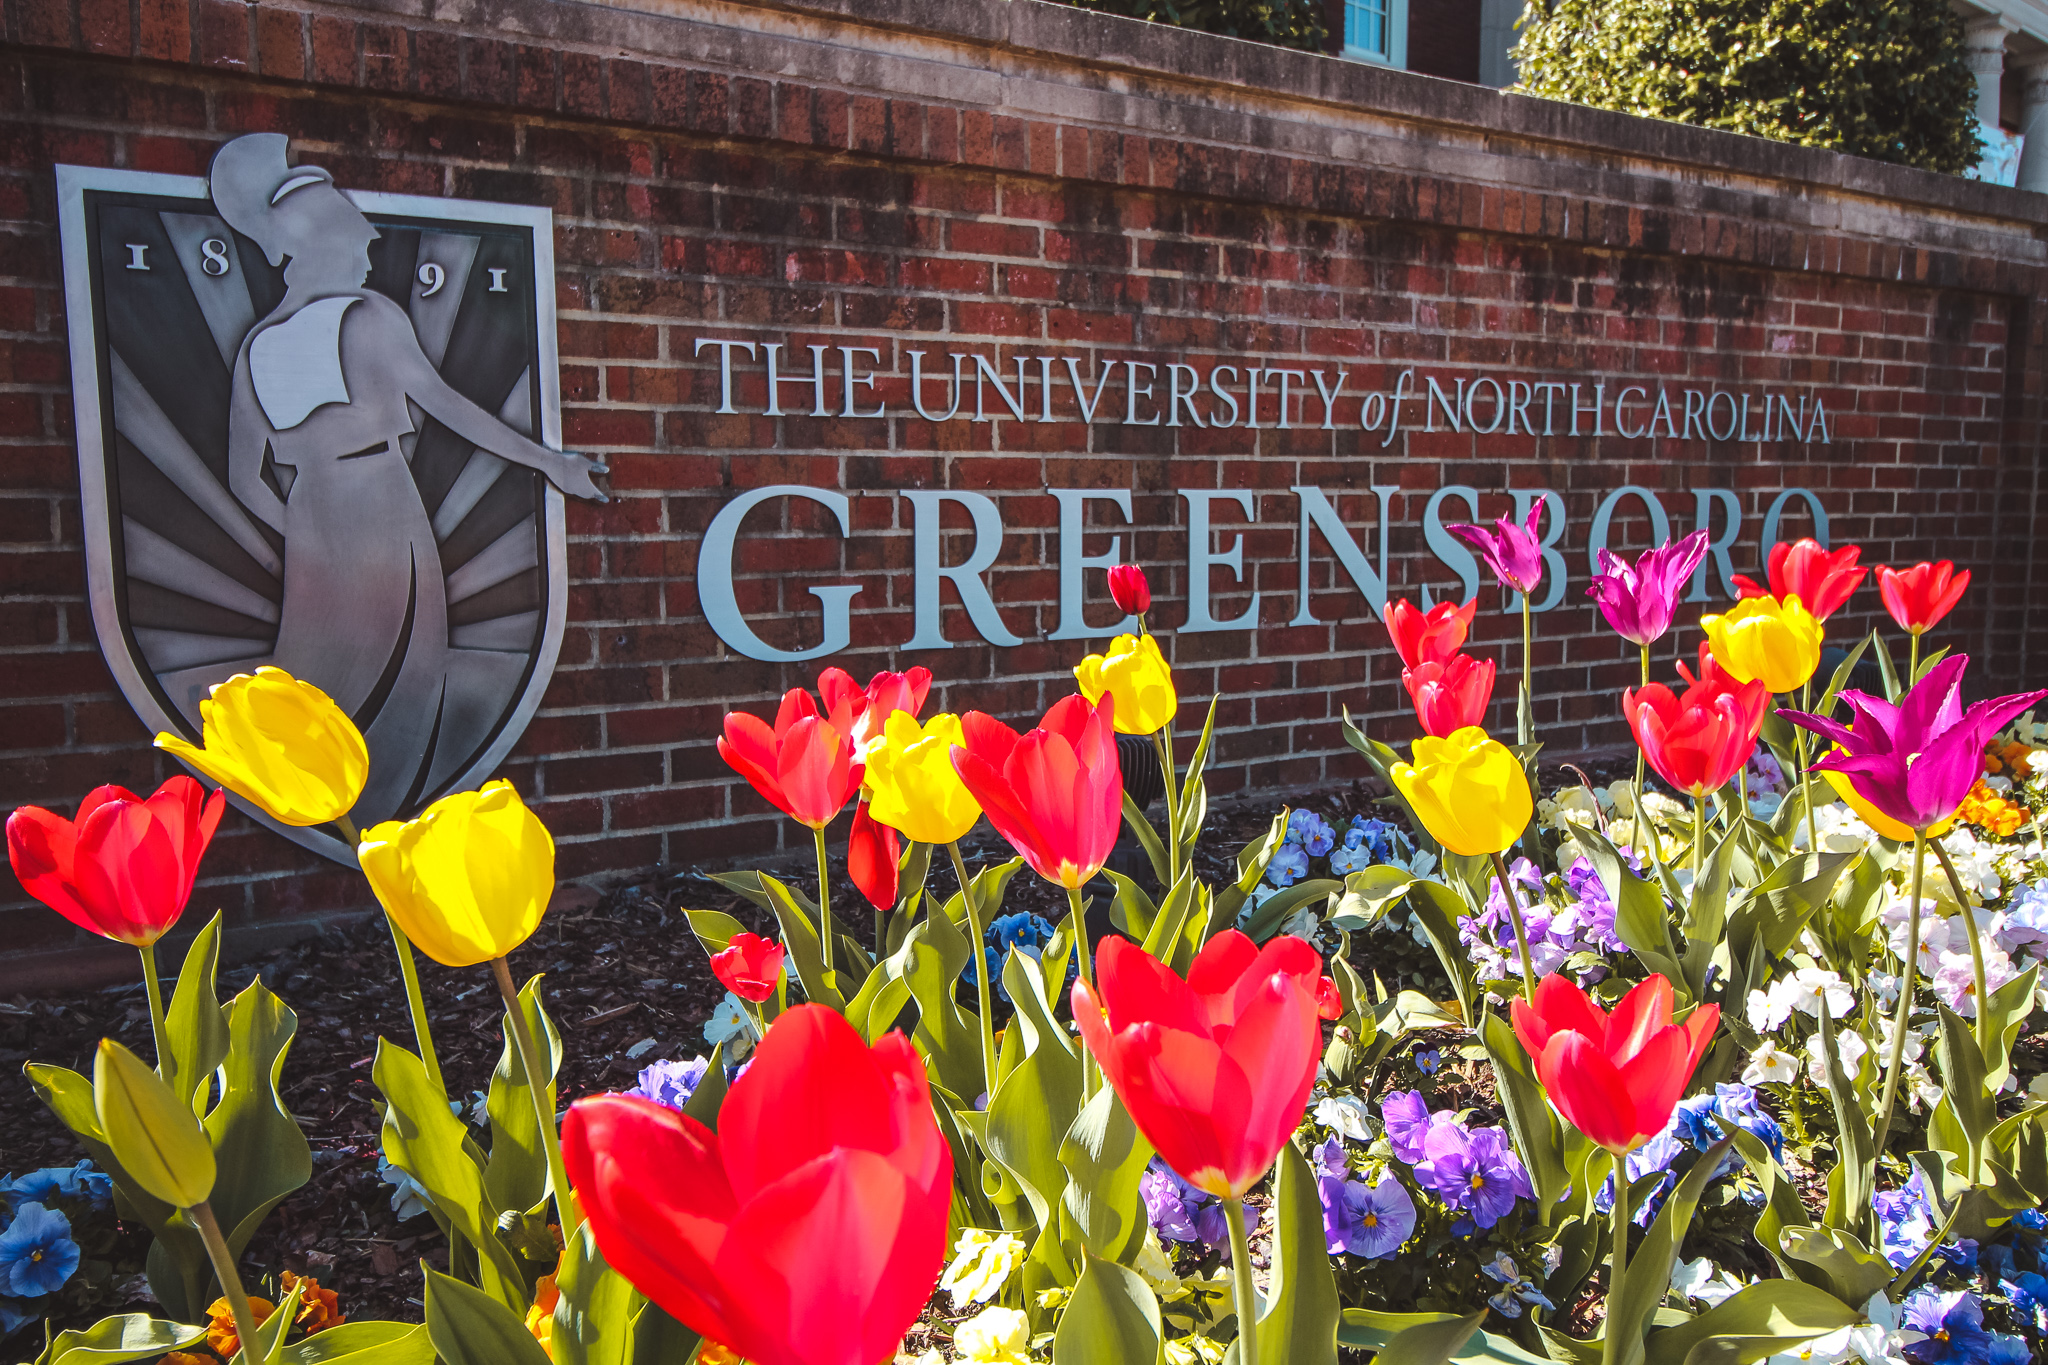 Tulips blooming in front of UNCG campus sign.